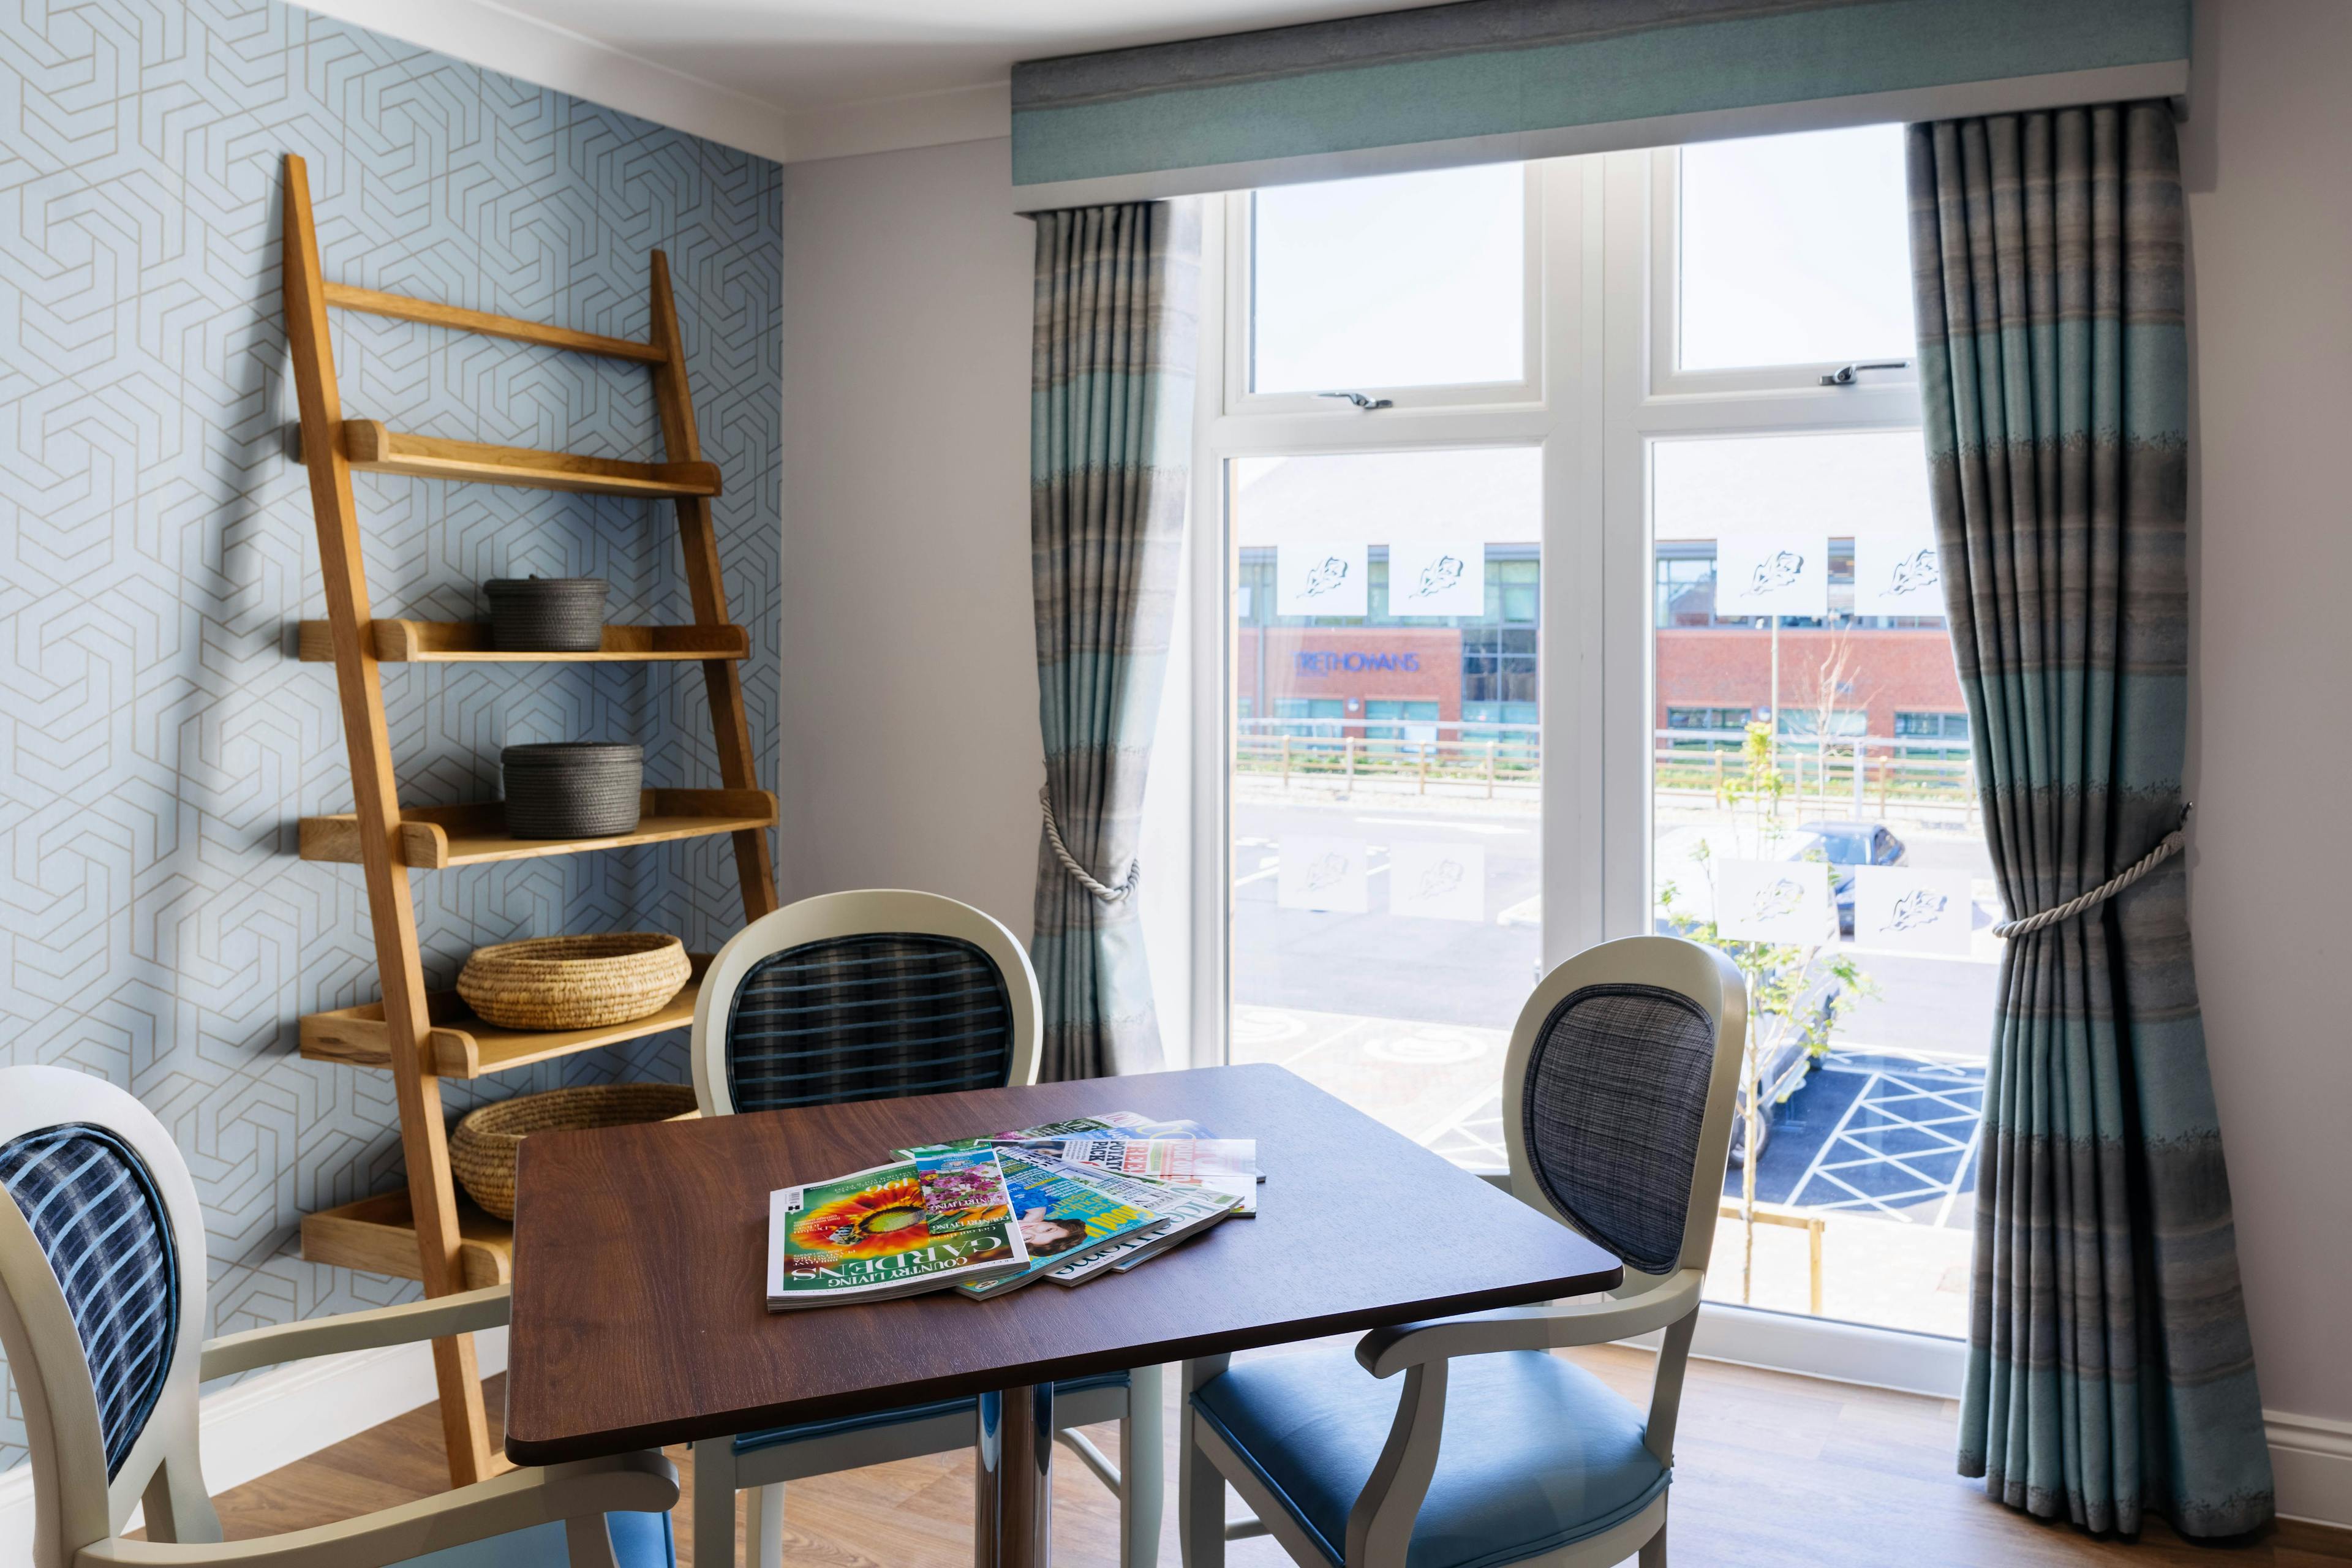 Quiet Area at Snowdrop Place Care Home in Southampton, Hampshire